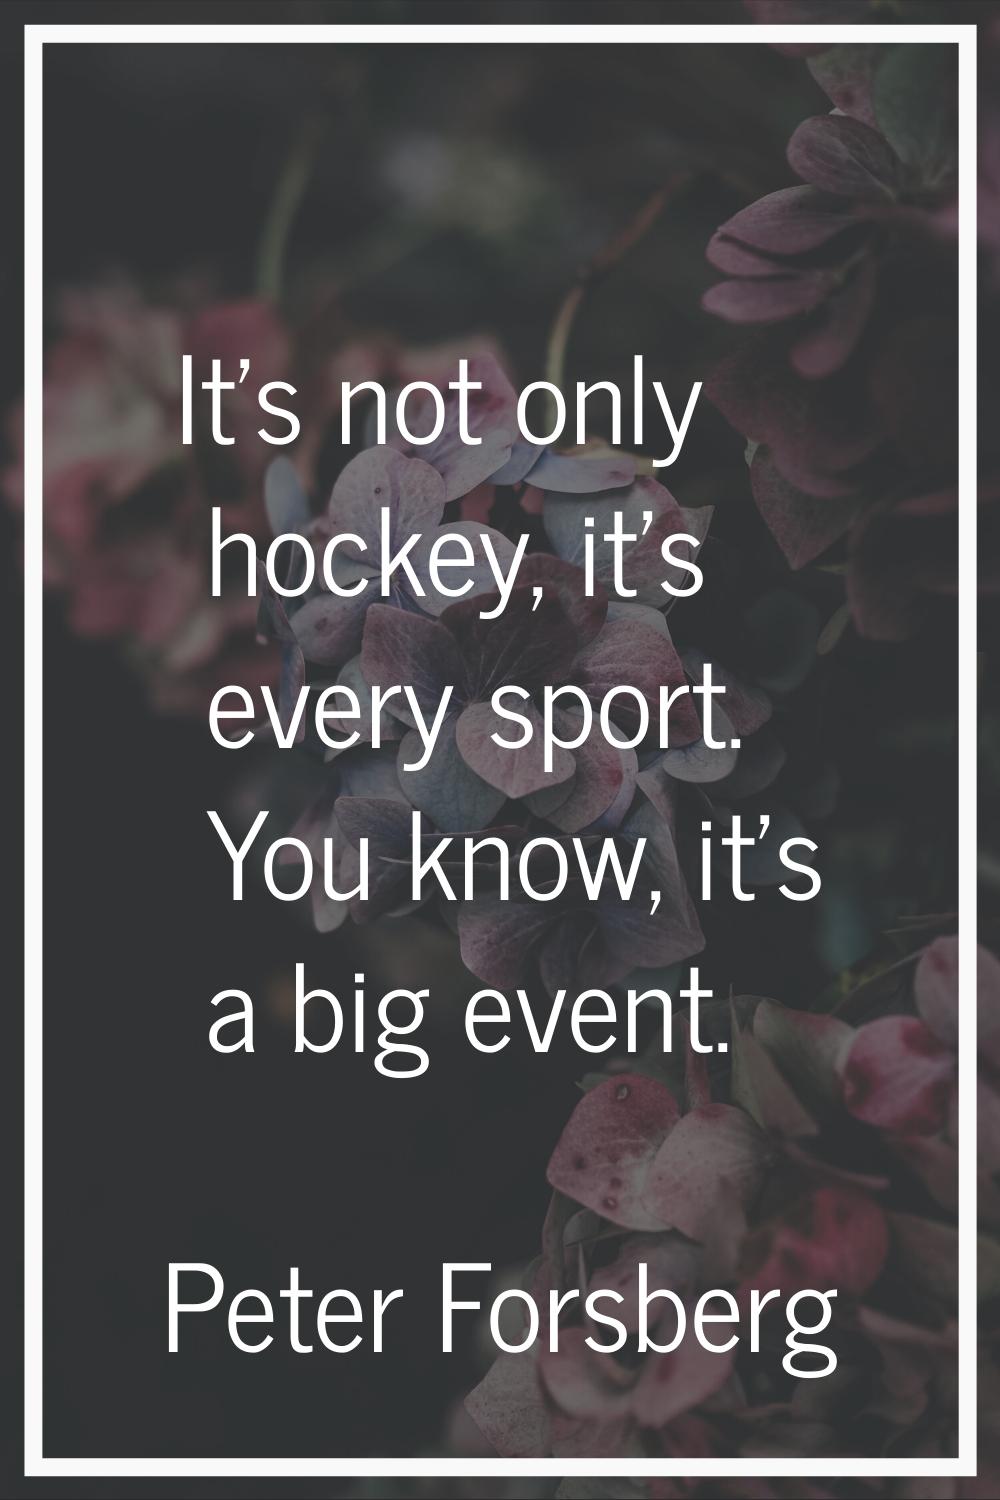 It's not only hockey, it's every sport. You know, it's a big event.